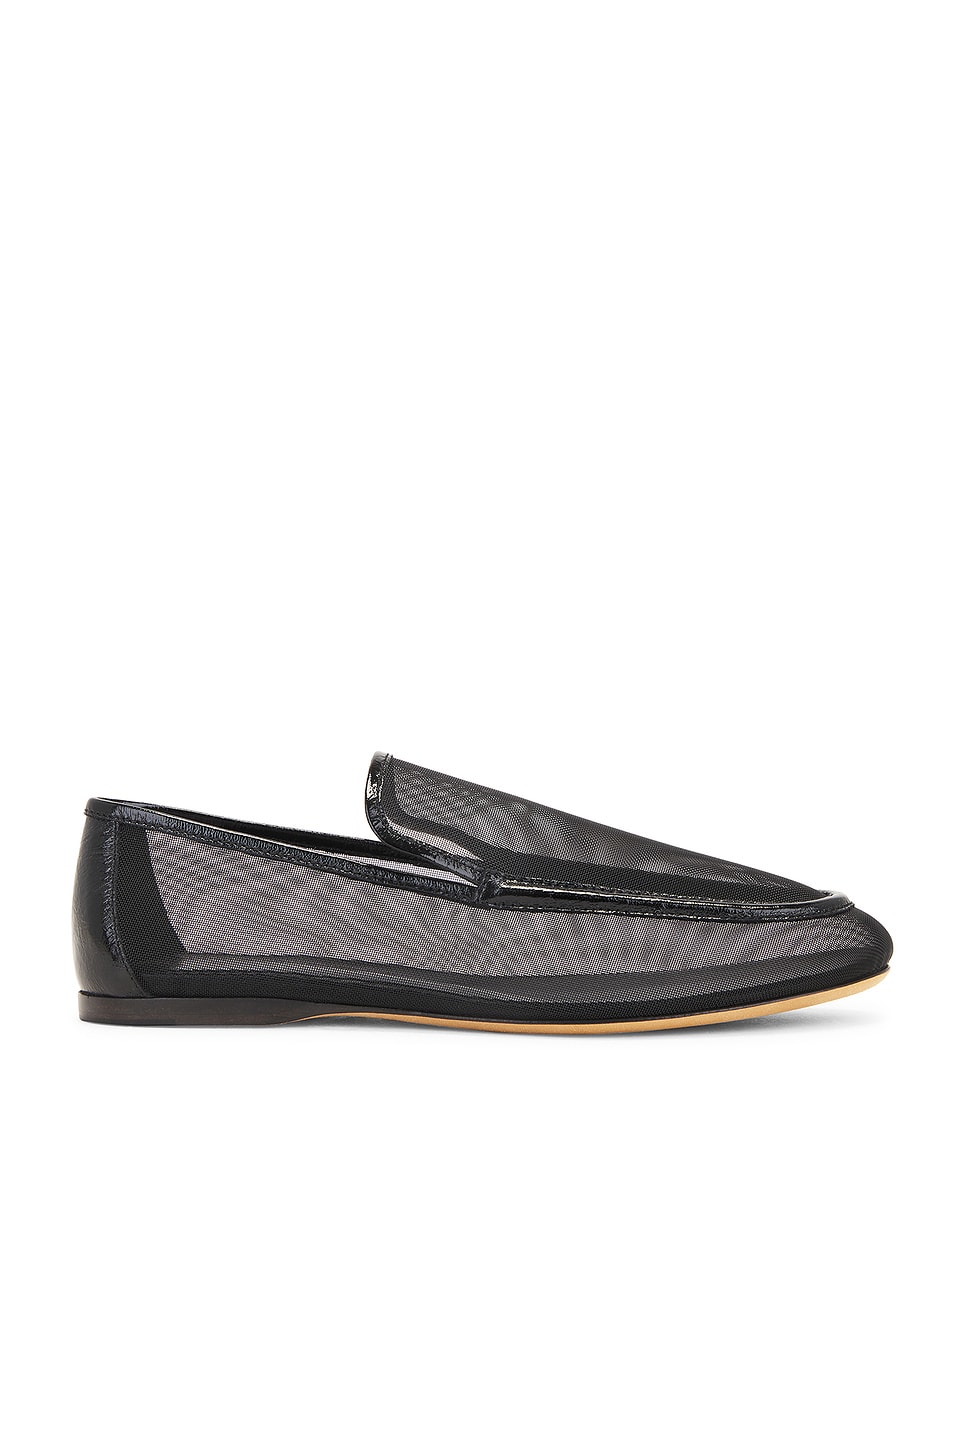 Image 1 of KHAITE Alessia Loafer in Black